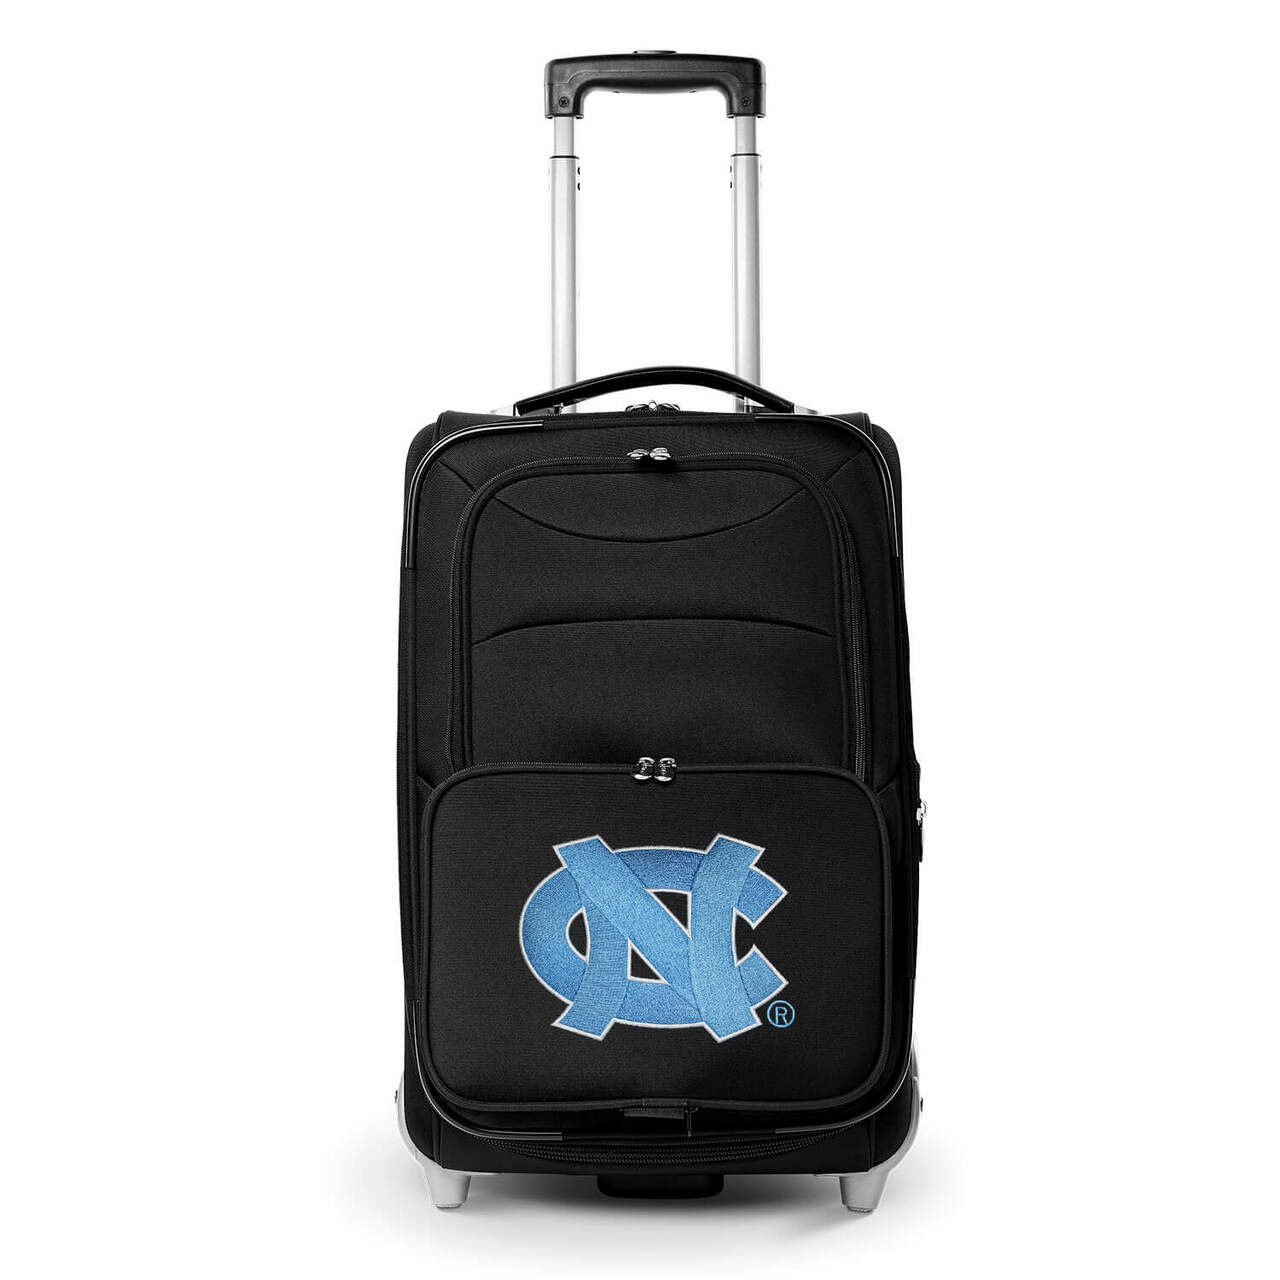 Tar Heels Carry On Luggage | UNC Tar Heels Rolling Carry On Luggage